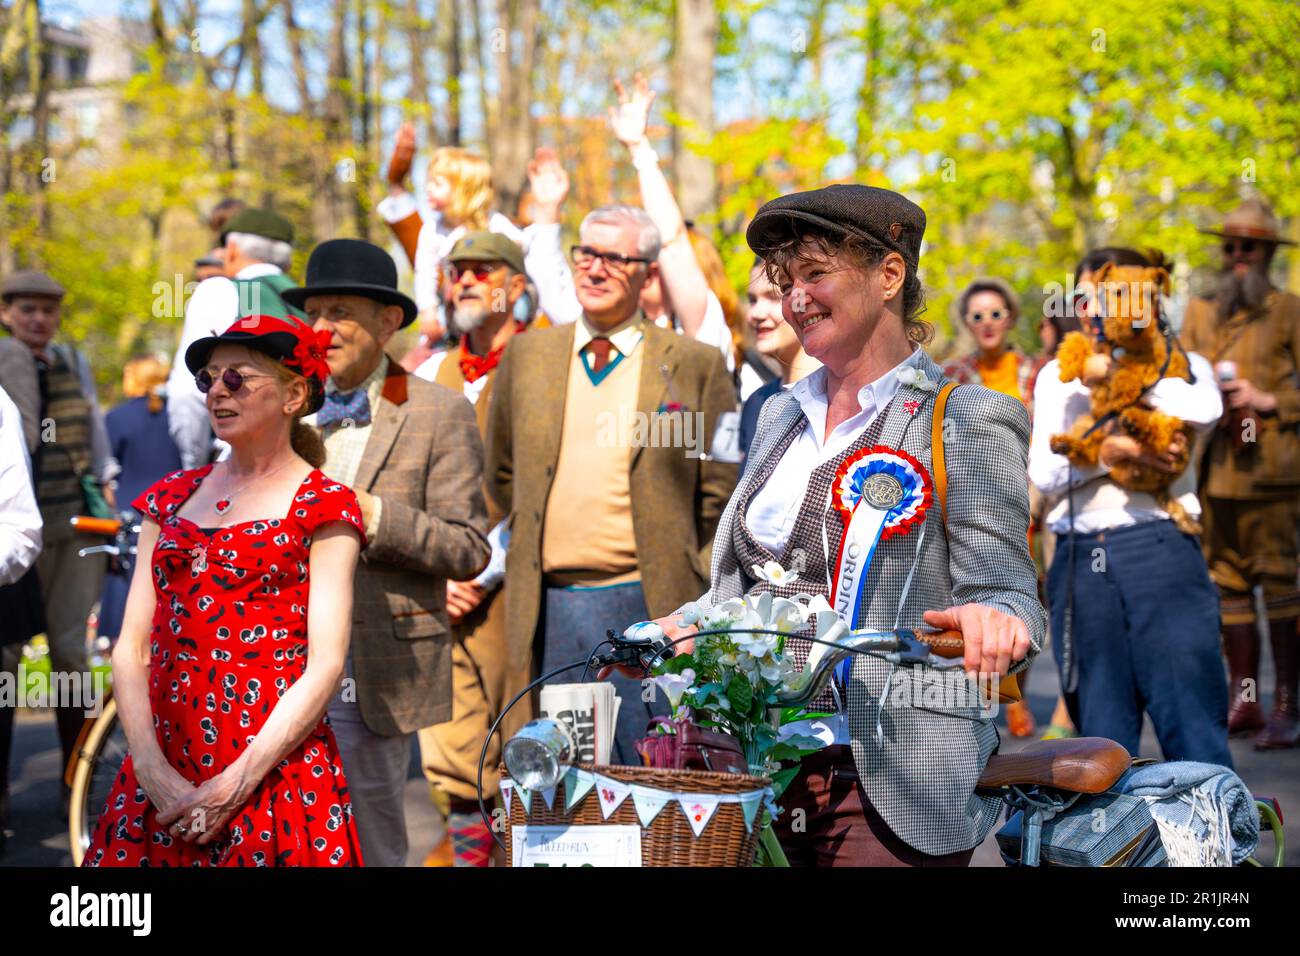 Tweed Run 2023 Bicycle Event - Vintage Dress Up middle aged woman in Crowd Smiling - Vintage bike event Stock Photo